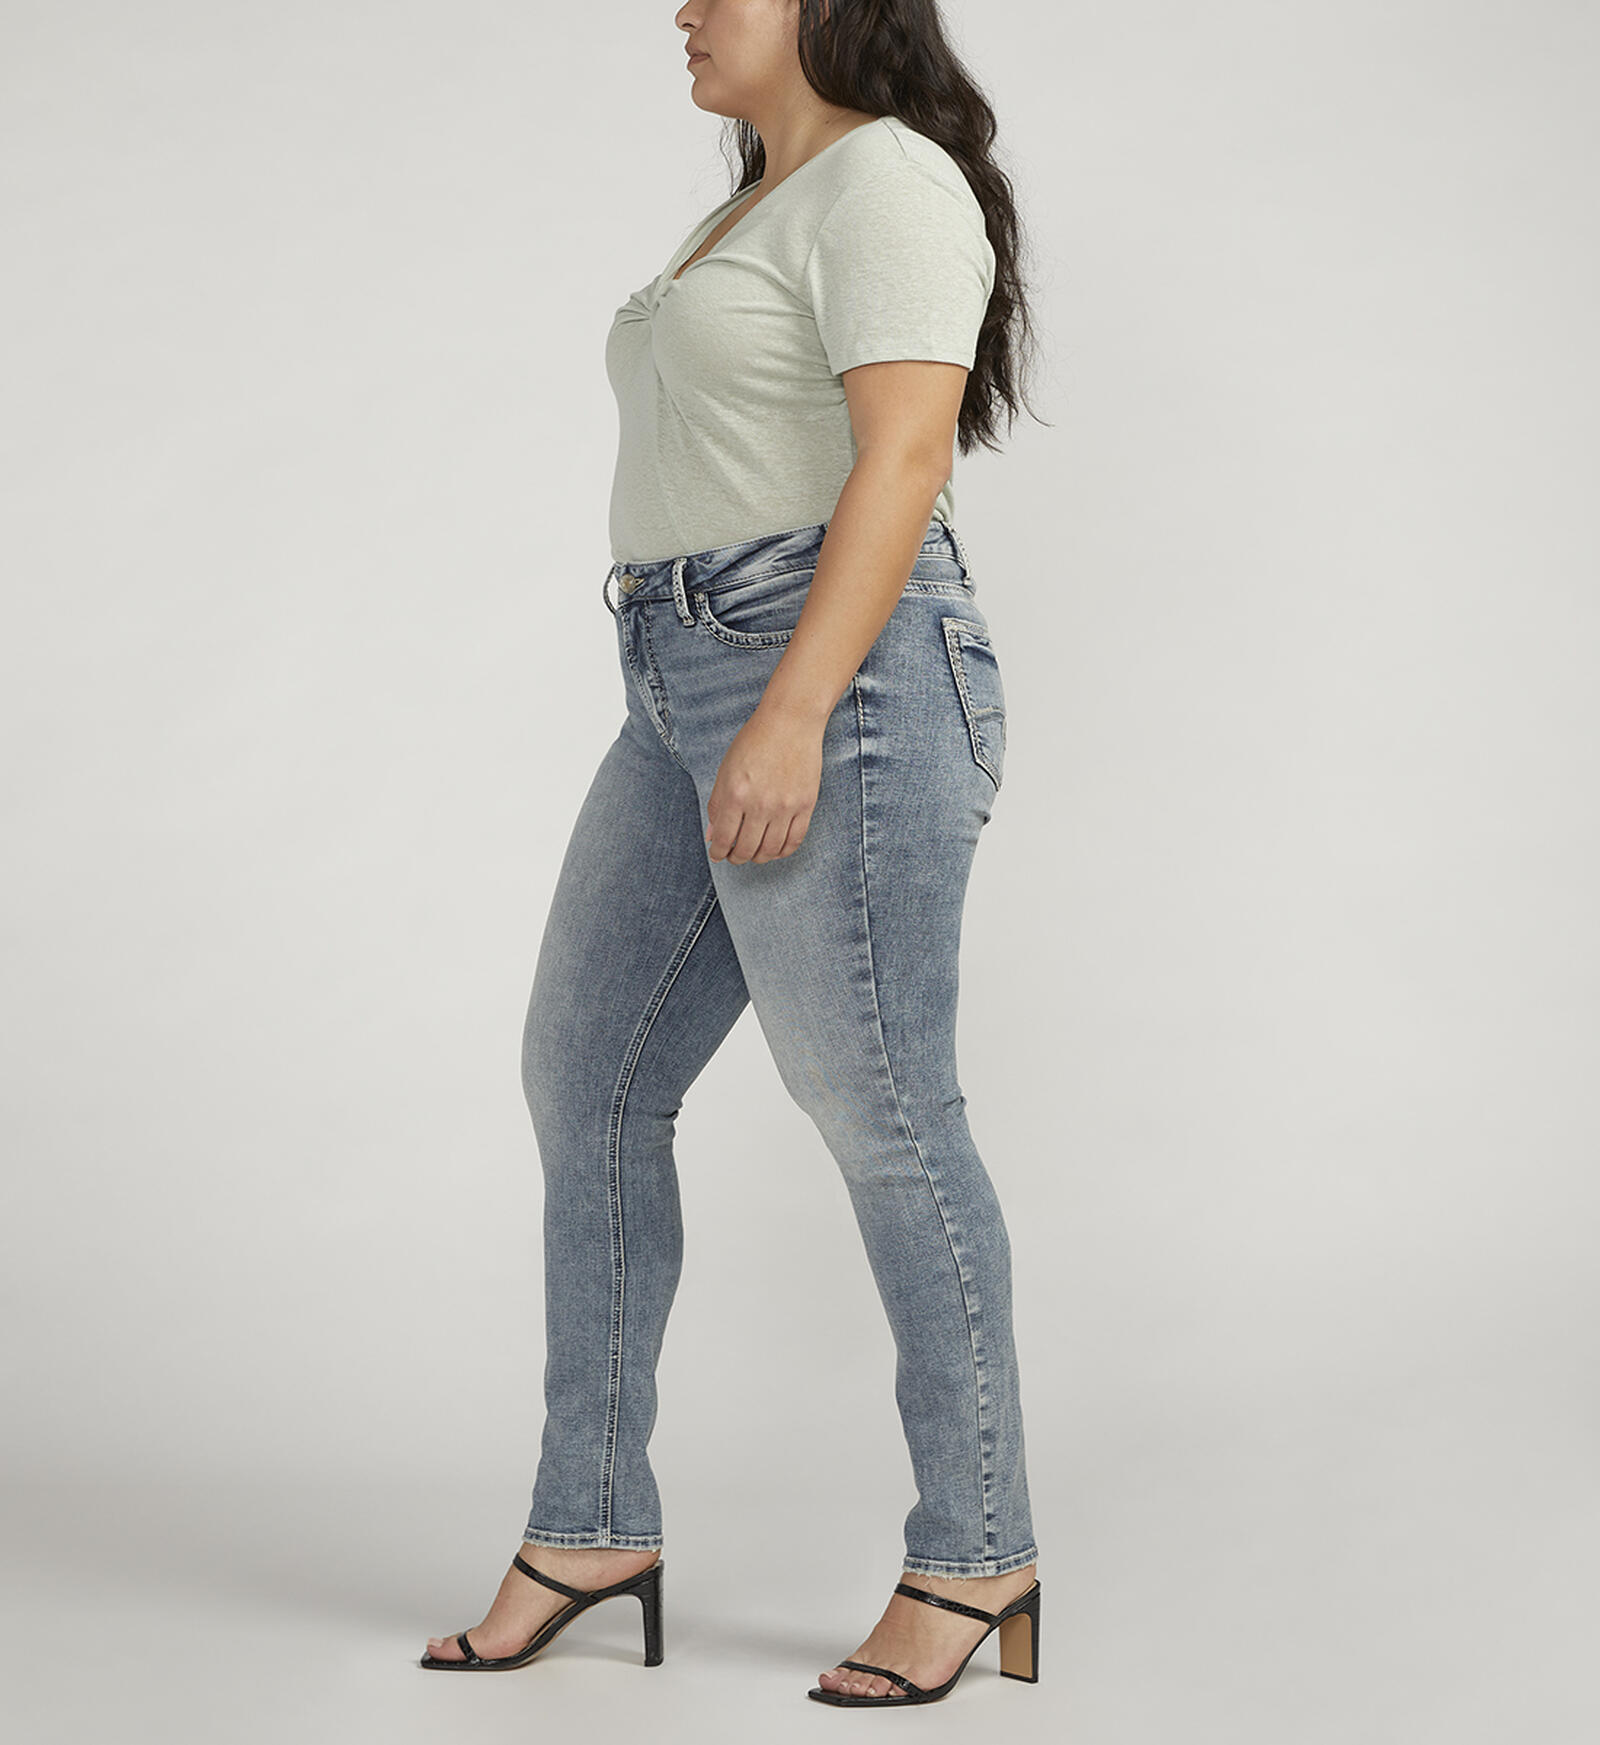 Buy Suki Mid Rise Straight Leg Jeans Plus Size for CAD 100.00